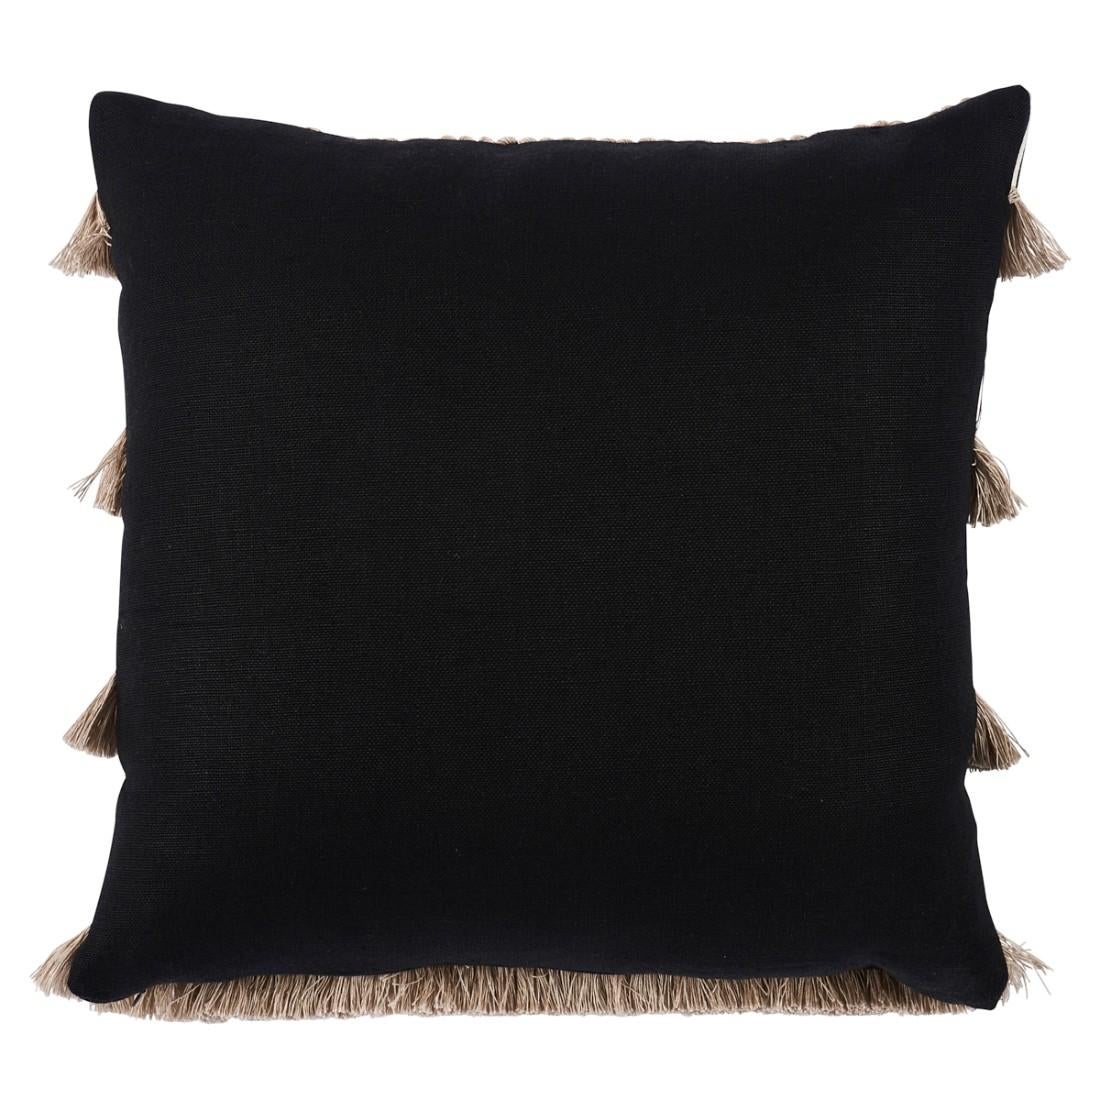 This pillow features Graphic Fringe with a knife edge finish. Graphic Fringe is a wide, ribbed ottoman tape with dense fringe along one side. Stylish and substantial, it’s an instantaneous favorite that adds a graphic, textural touch. Body of pillow